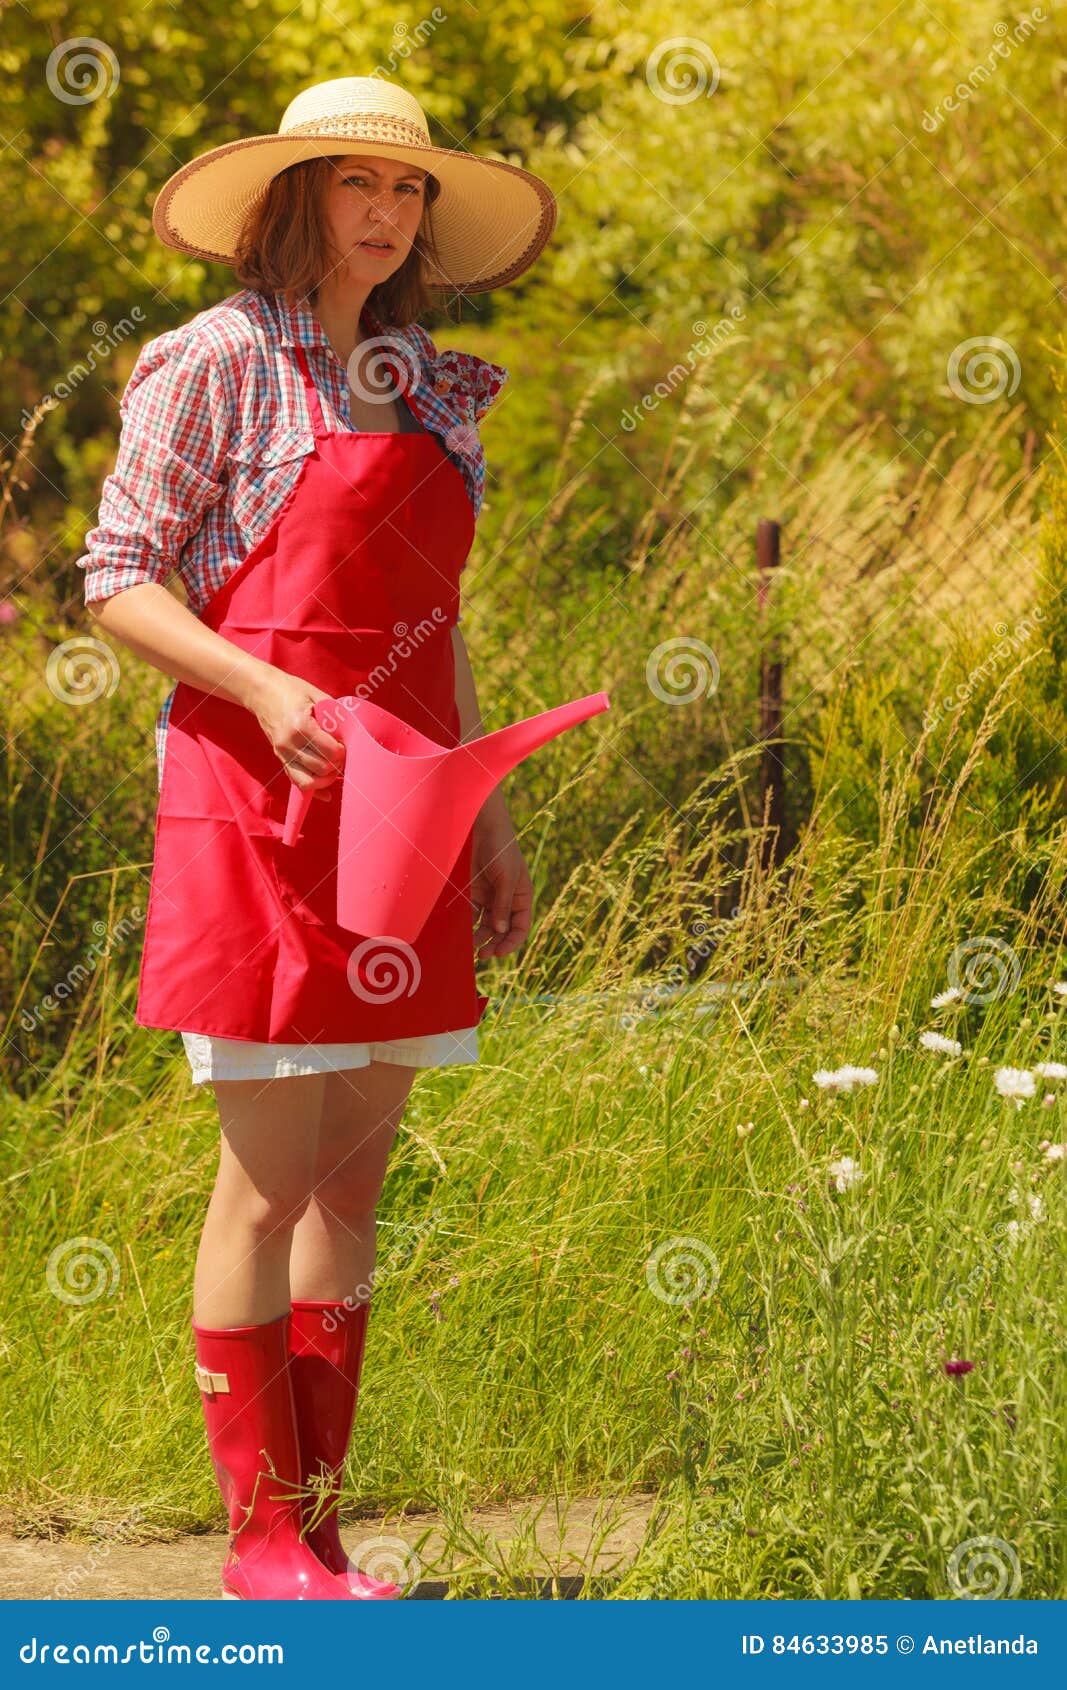 Woman Watering Plants in Garden Stock Image - Image of working, apron ...